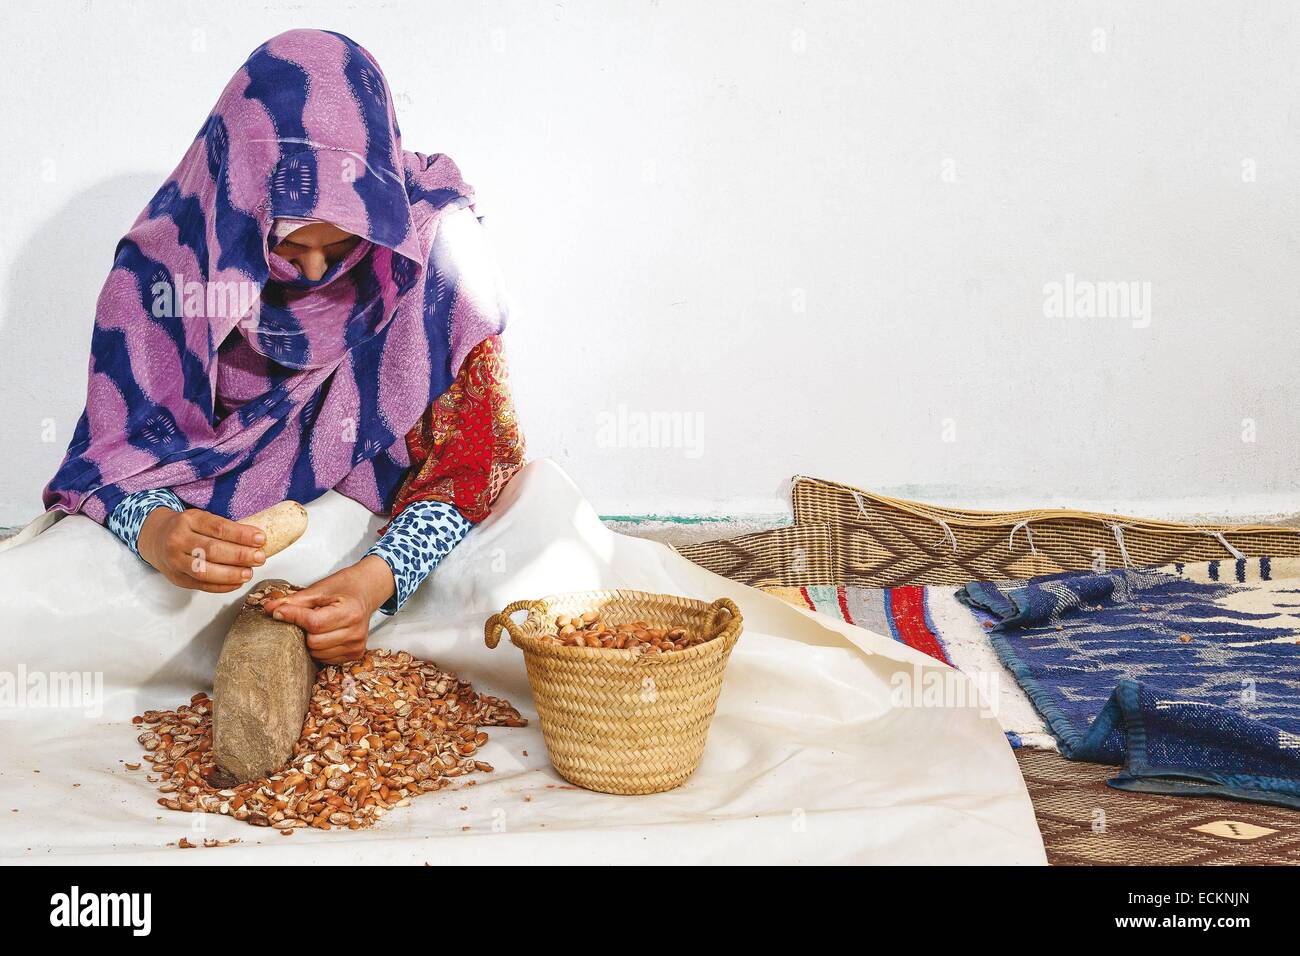 Morocco, Souss region, Ighrem, cooperative Moroccan women, woman in charge of pulping the seeds of argan, pulping of argan seeds manually and traditional Stock Photo